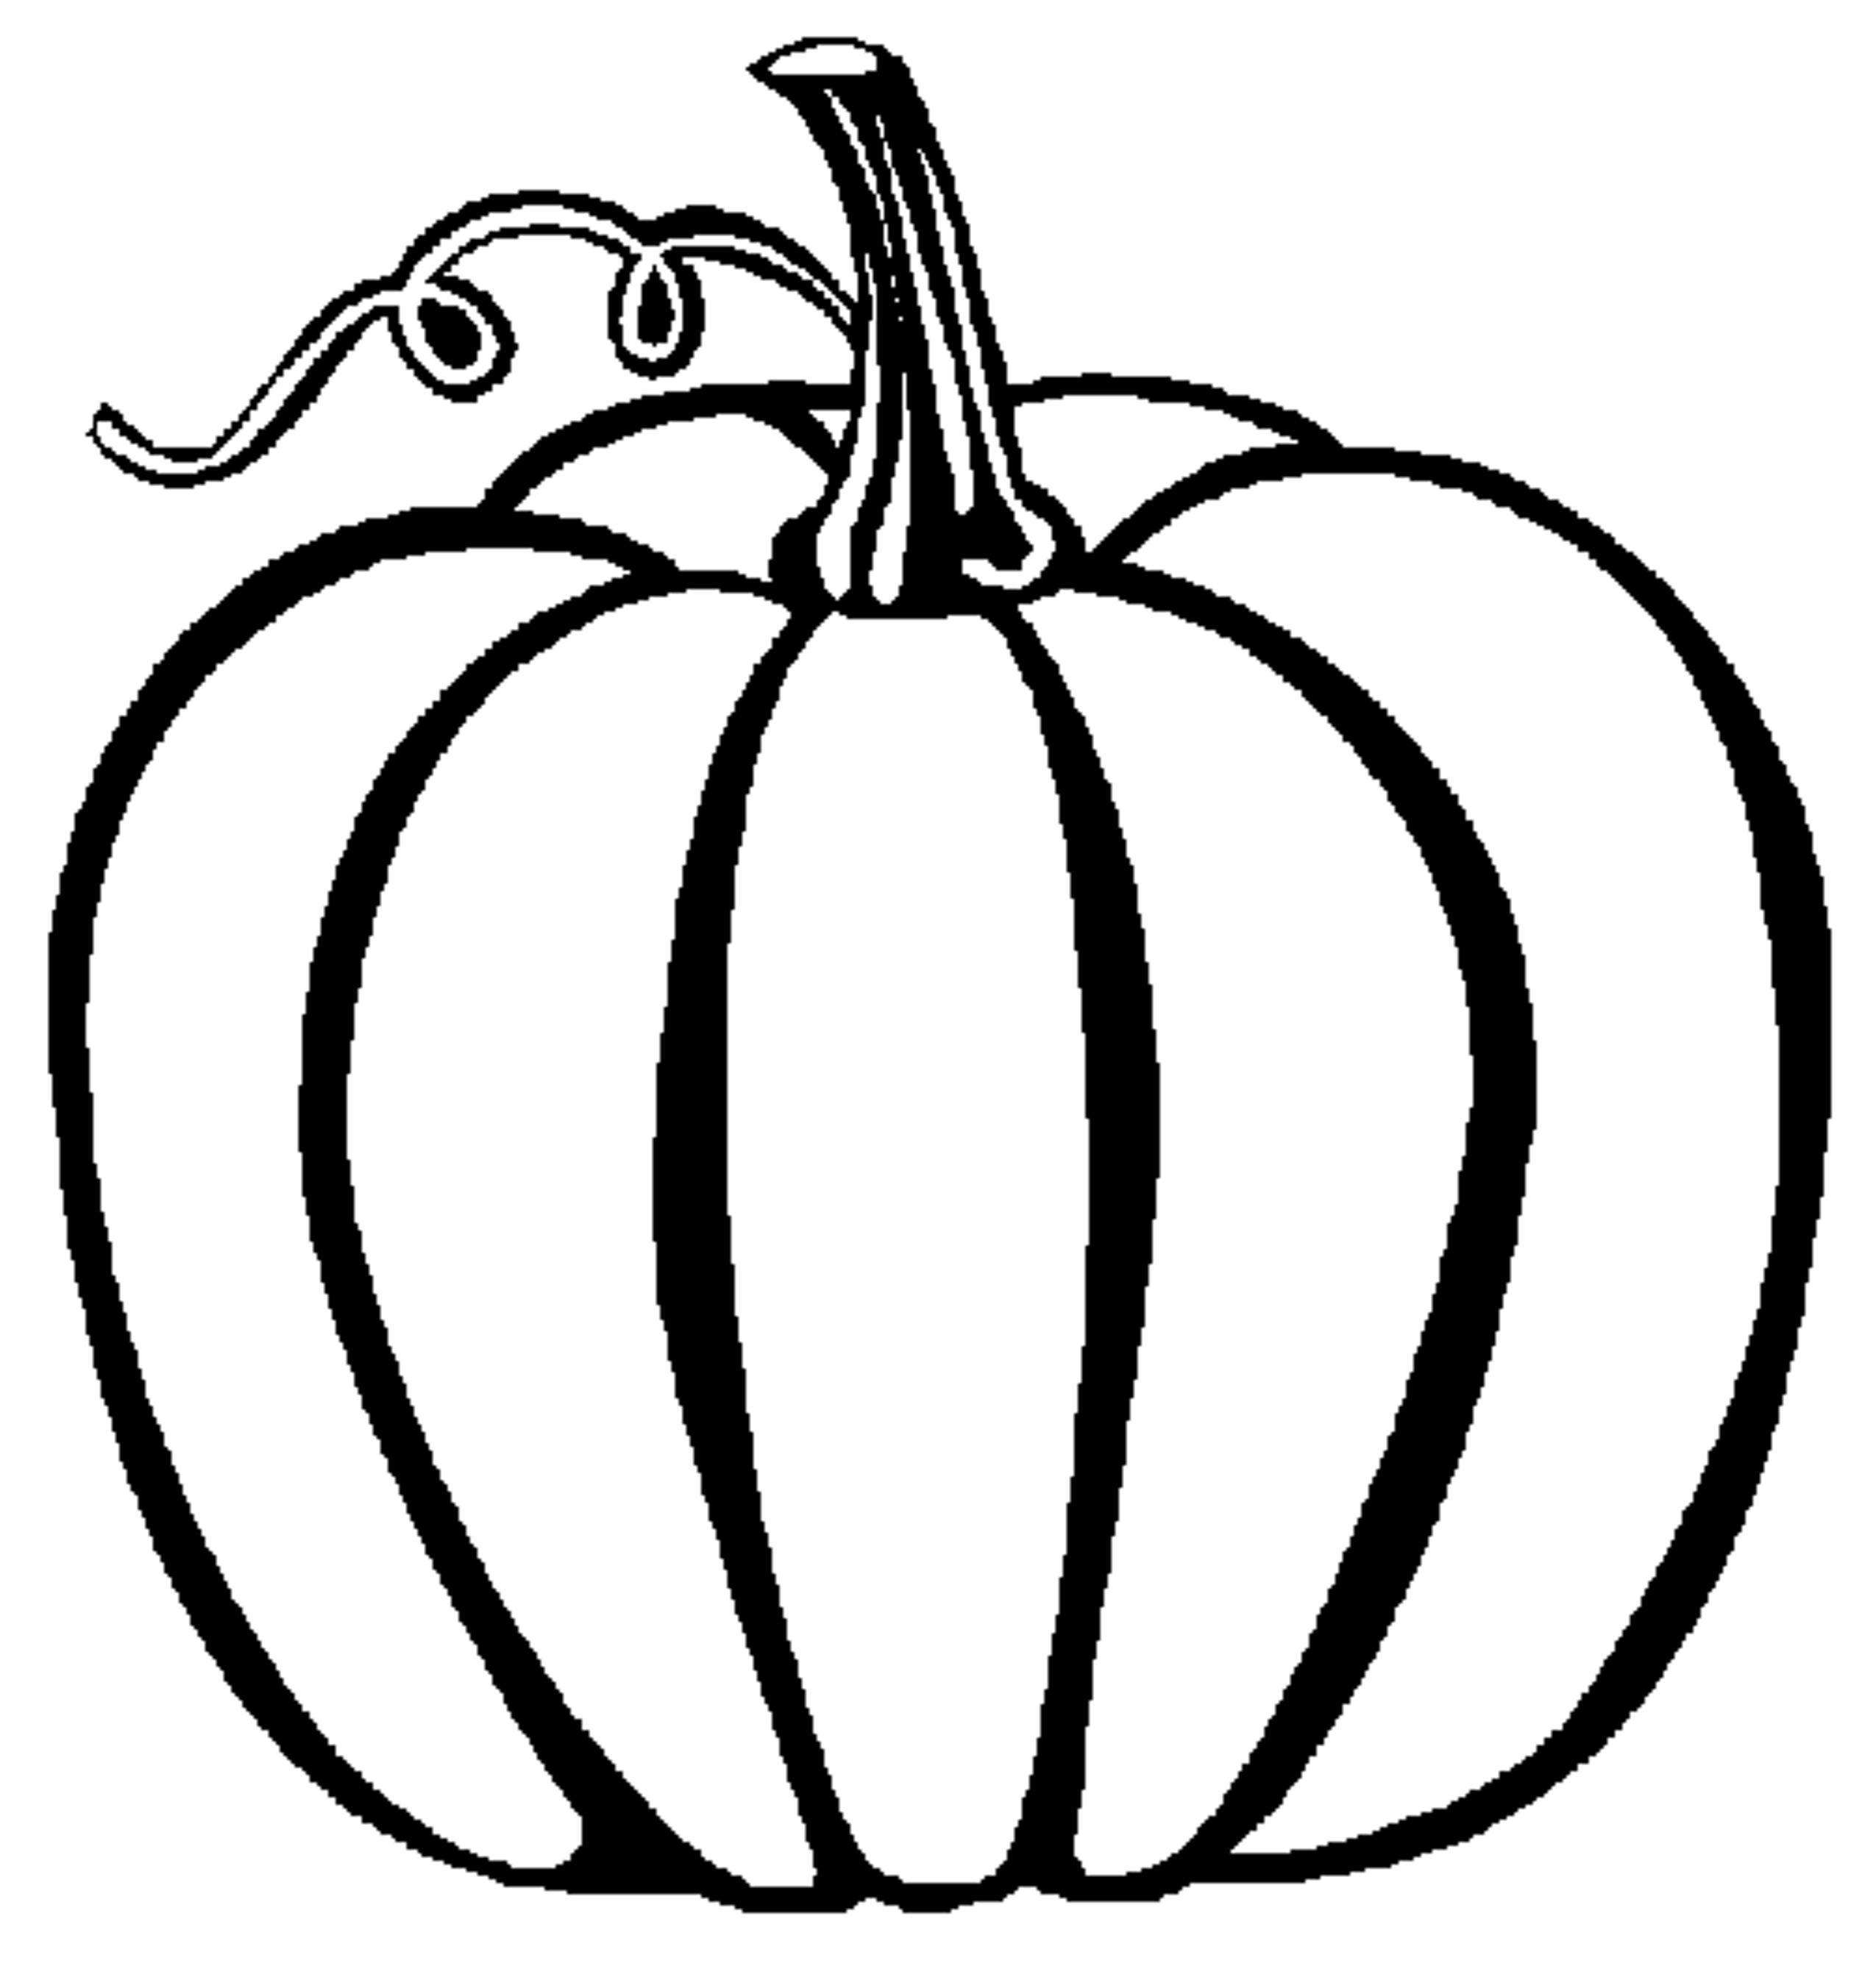 Fall Pumpkin Coloring Pages To Print - Coloring Home